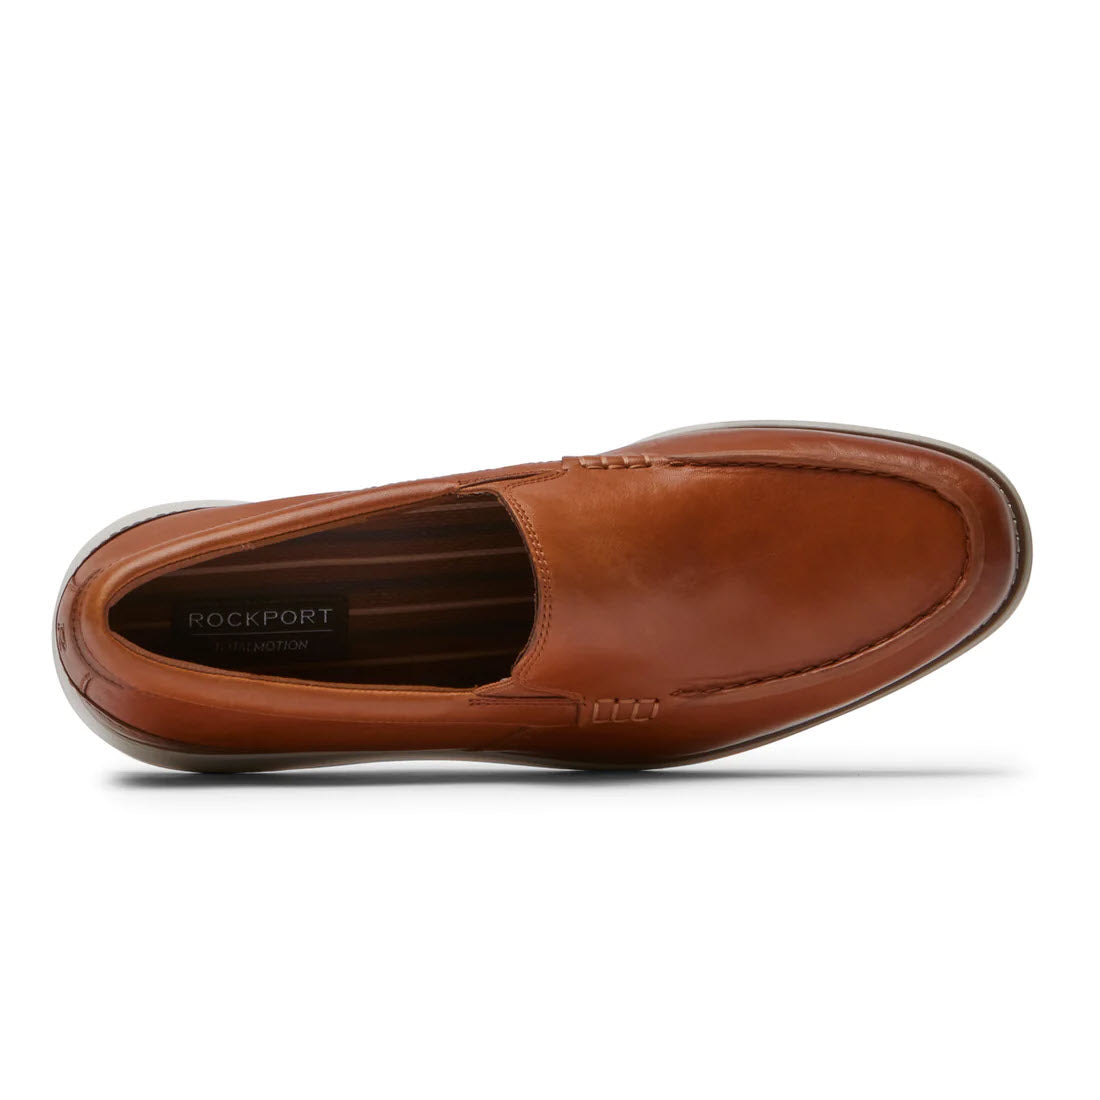 Top view of a single brown Rockport Total Motion Craft Venetian Cognac loafer against a white background.